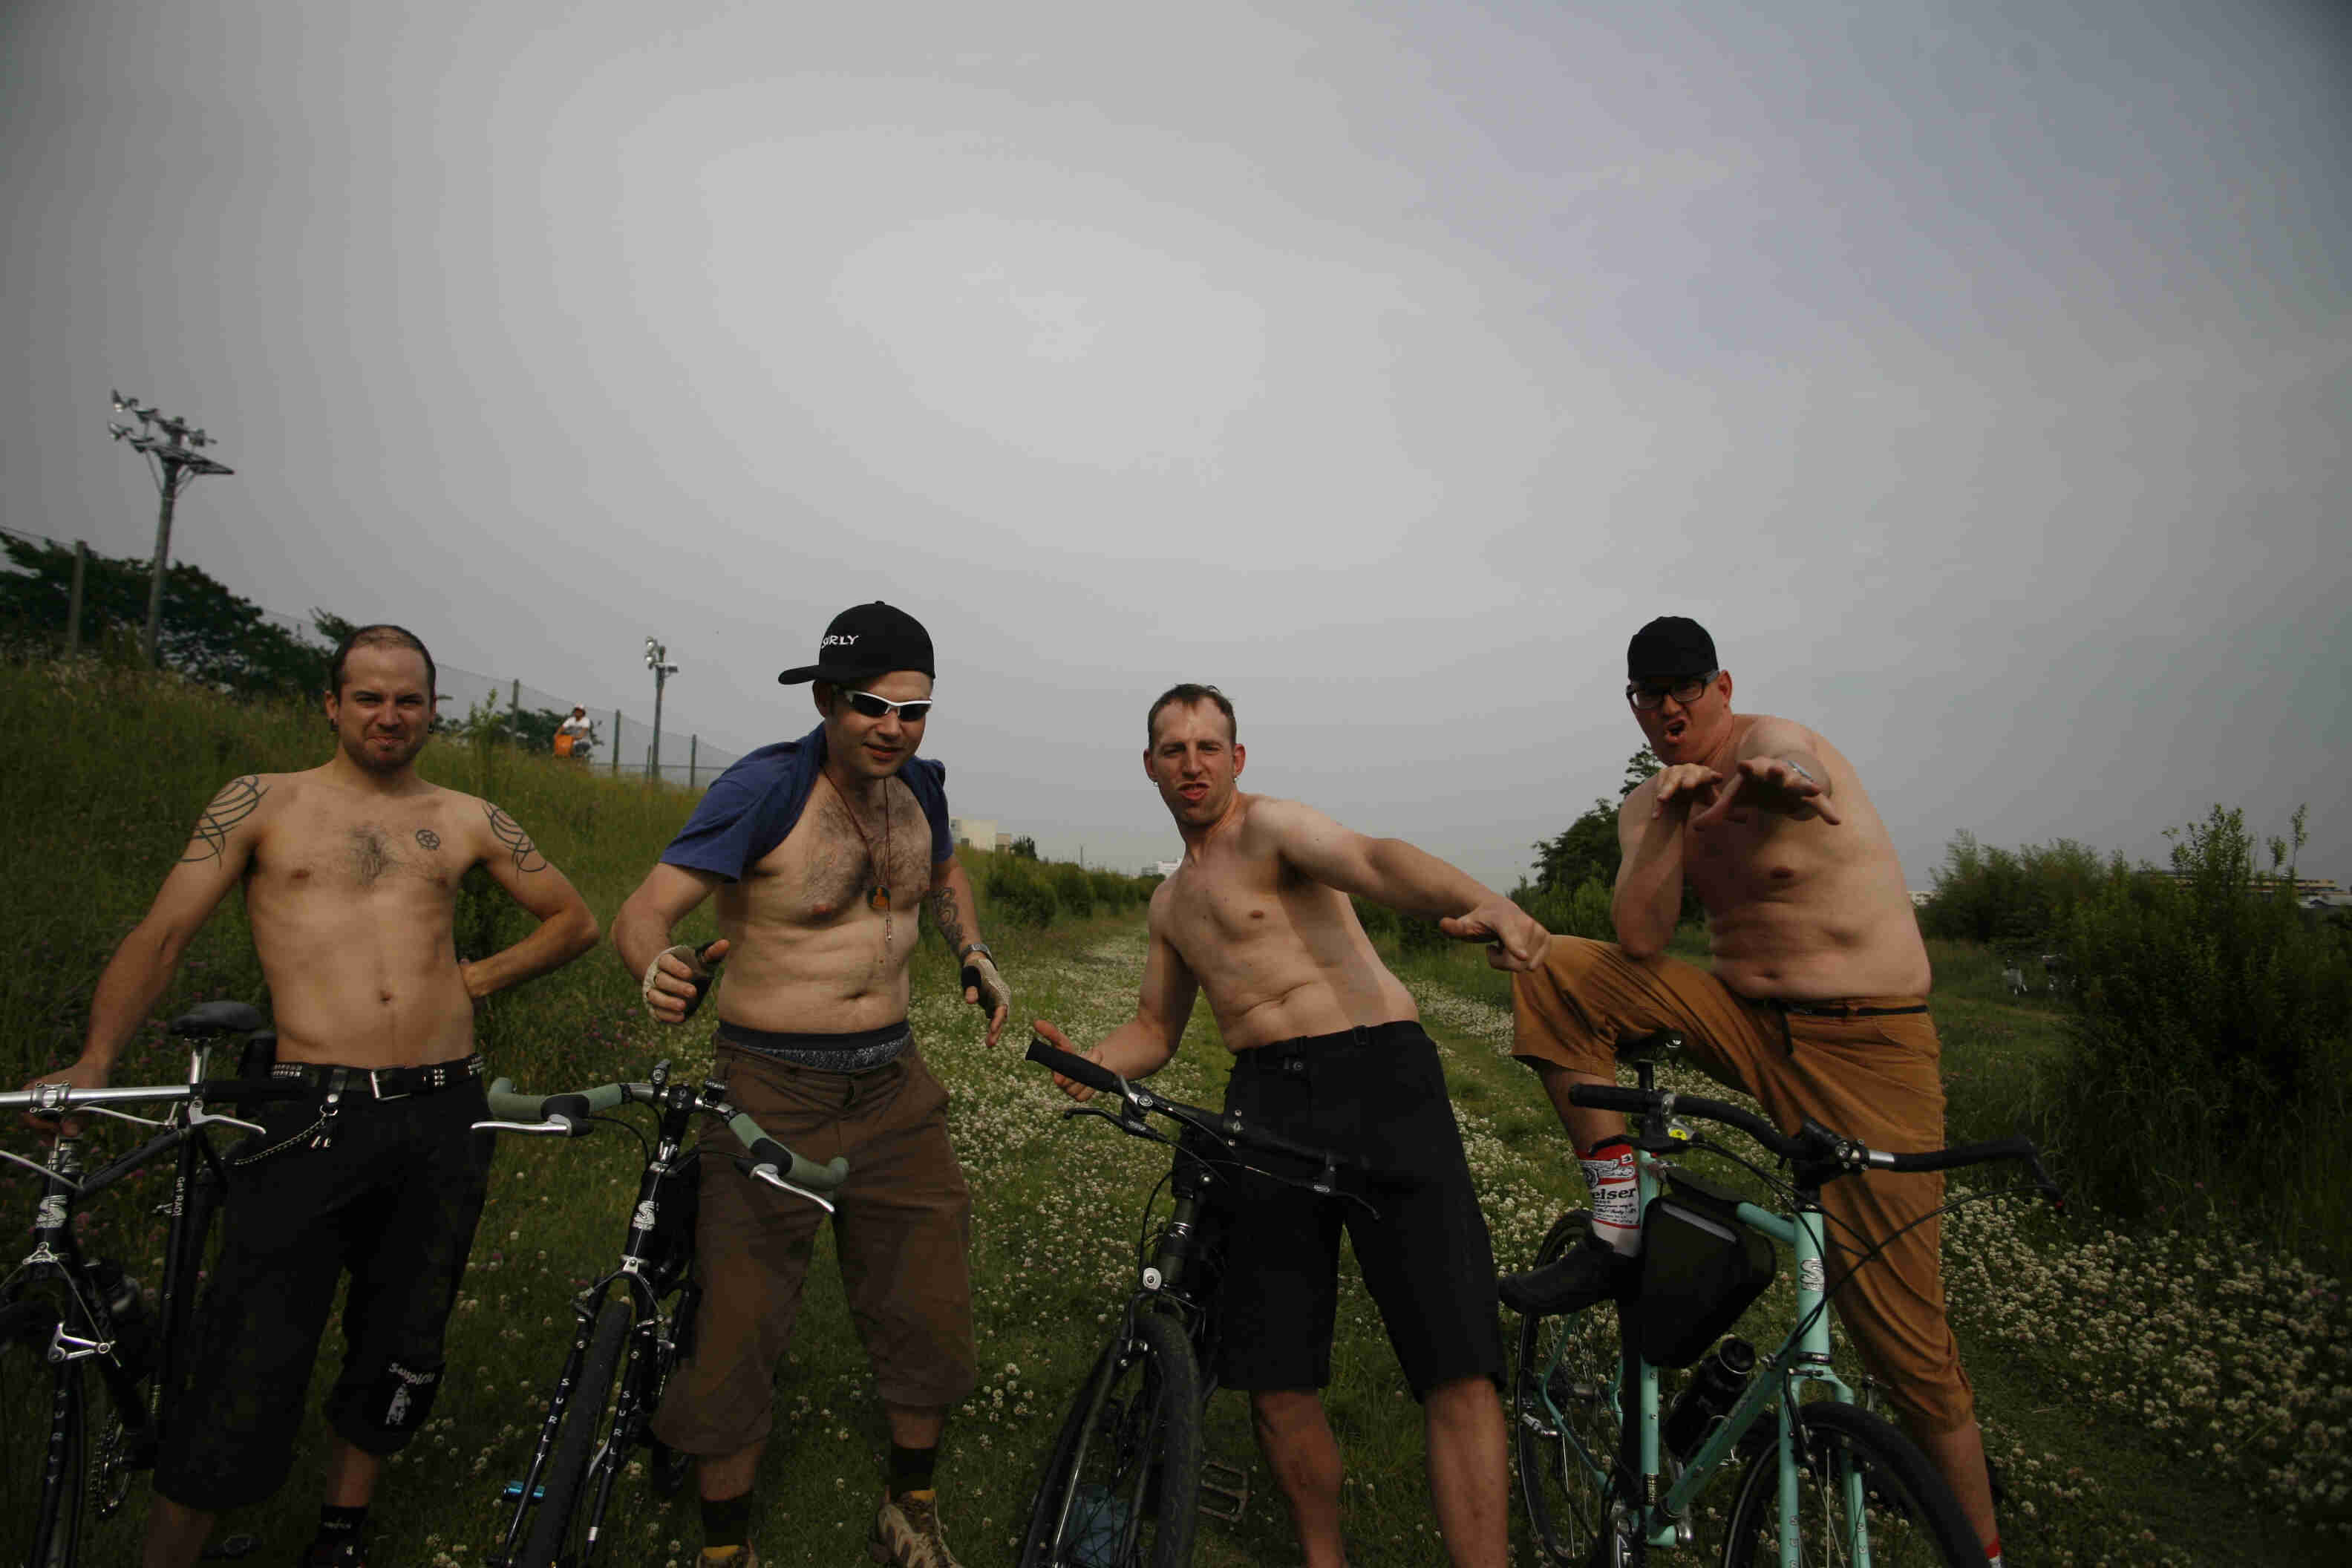 Front view of 4 people with their Surly bikes, standing side by side with no shirts, at the bottom of a grassy hill